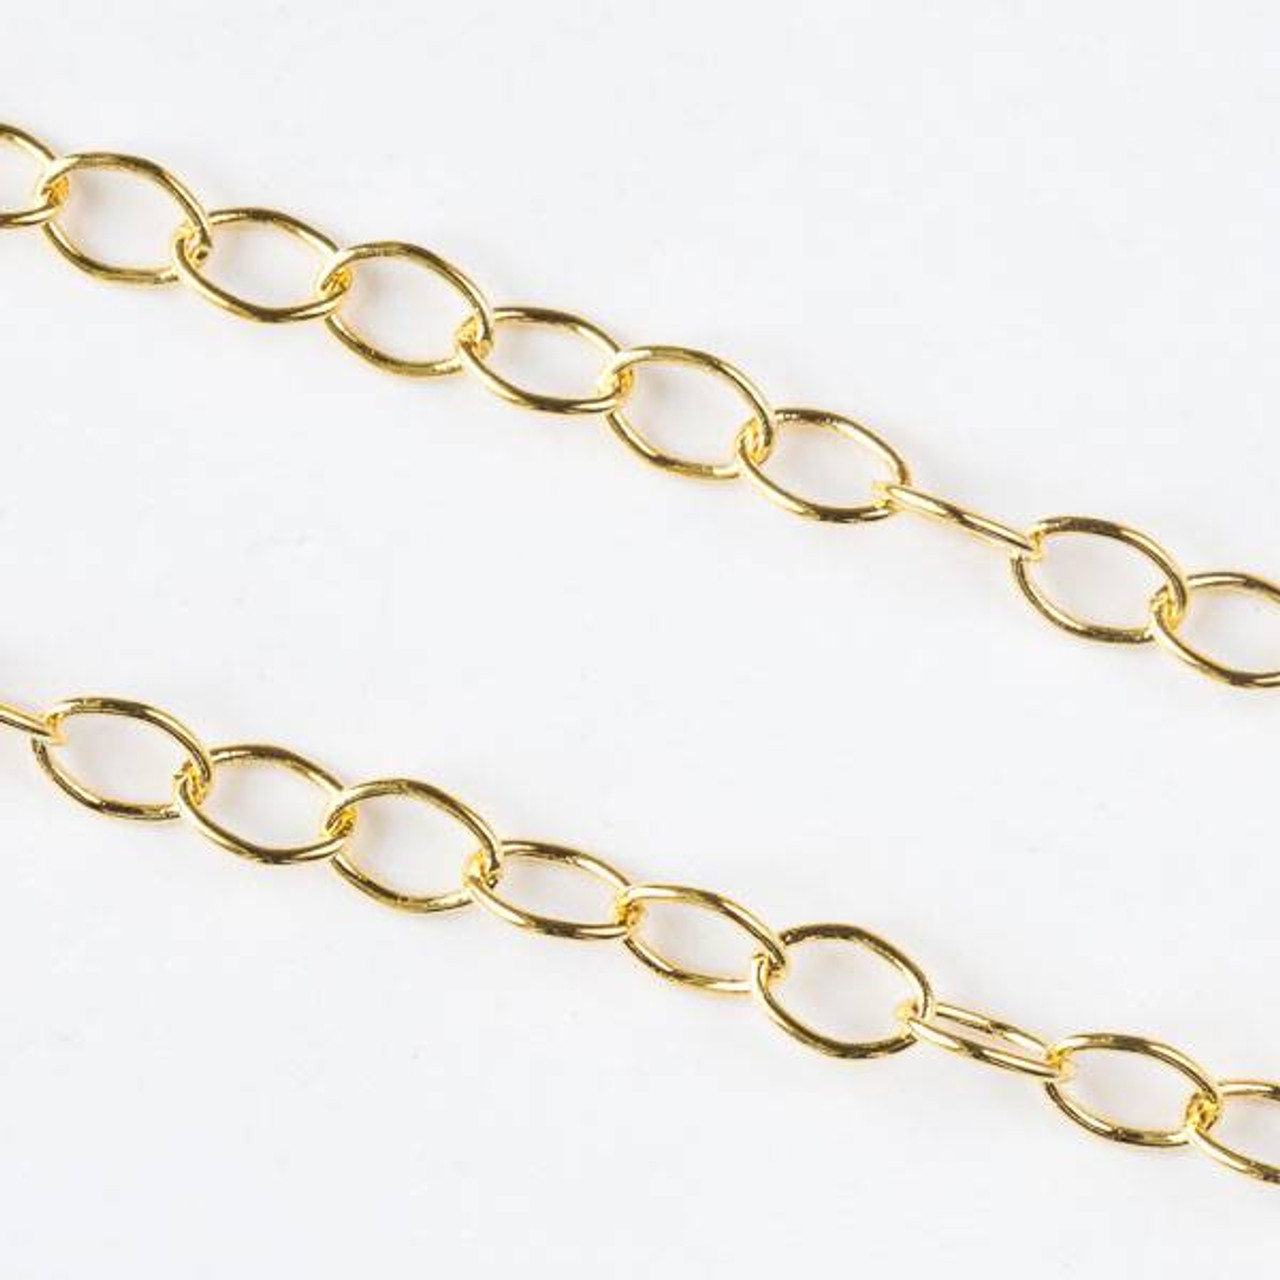 Gold Brass Chain with 5x7mm Soldered Oval Links - chain280Sg-sp - 25 yard  spool